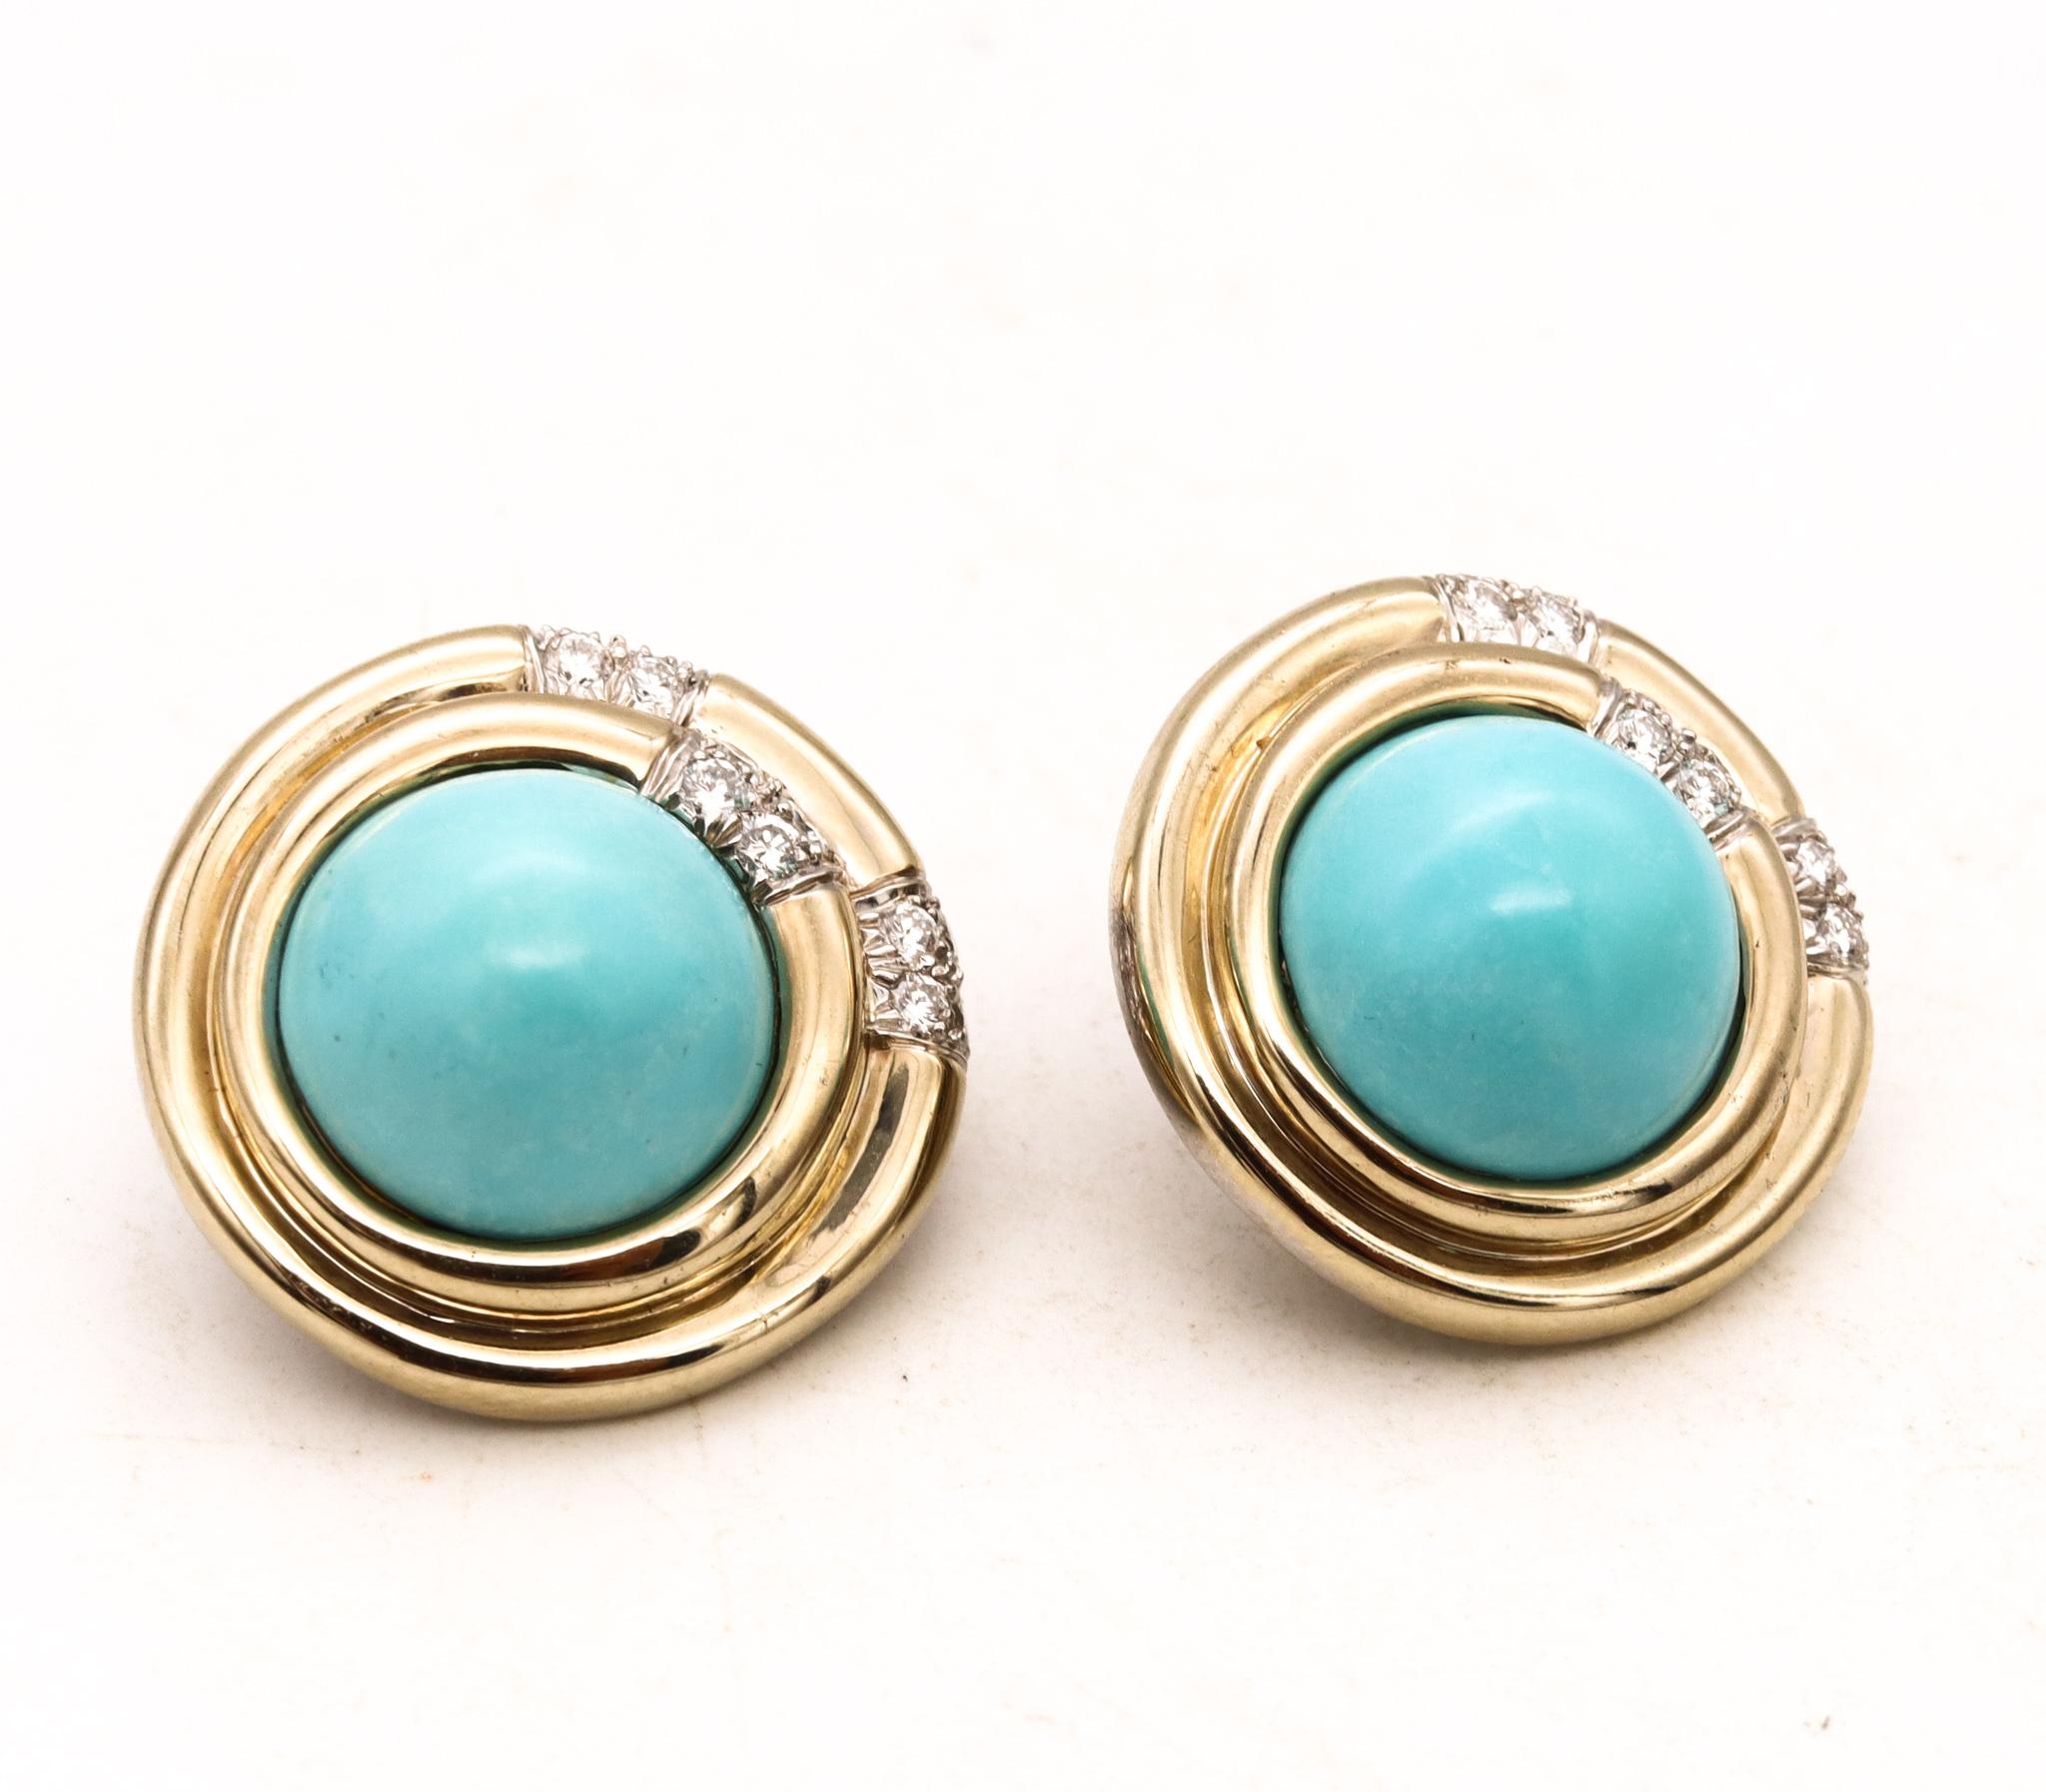 Cabochon Charles Turi New York Clip Earrings 18Kt Gold with 25.94 Cts Diamond Turquoises For Sale